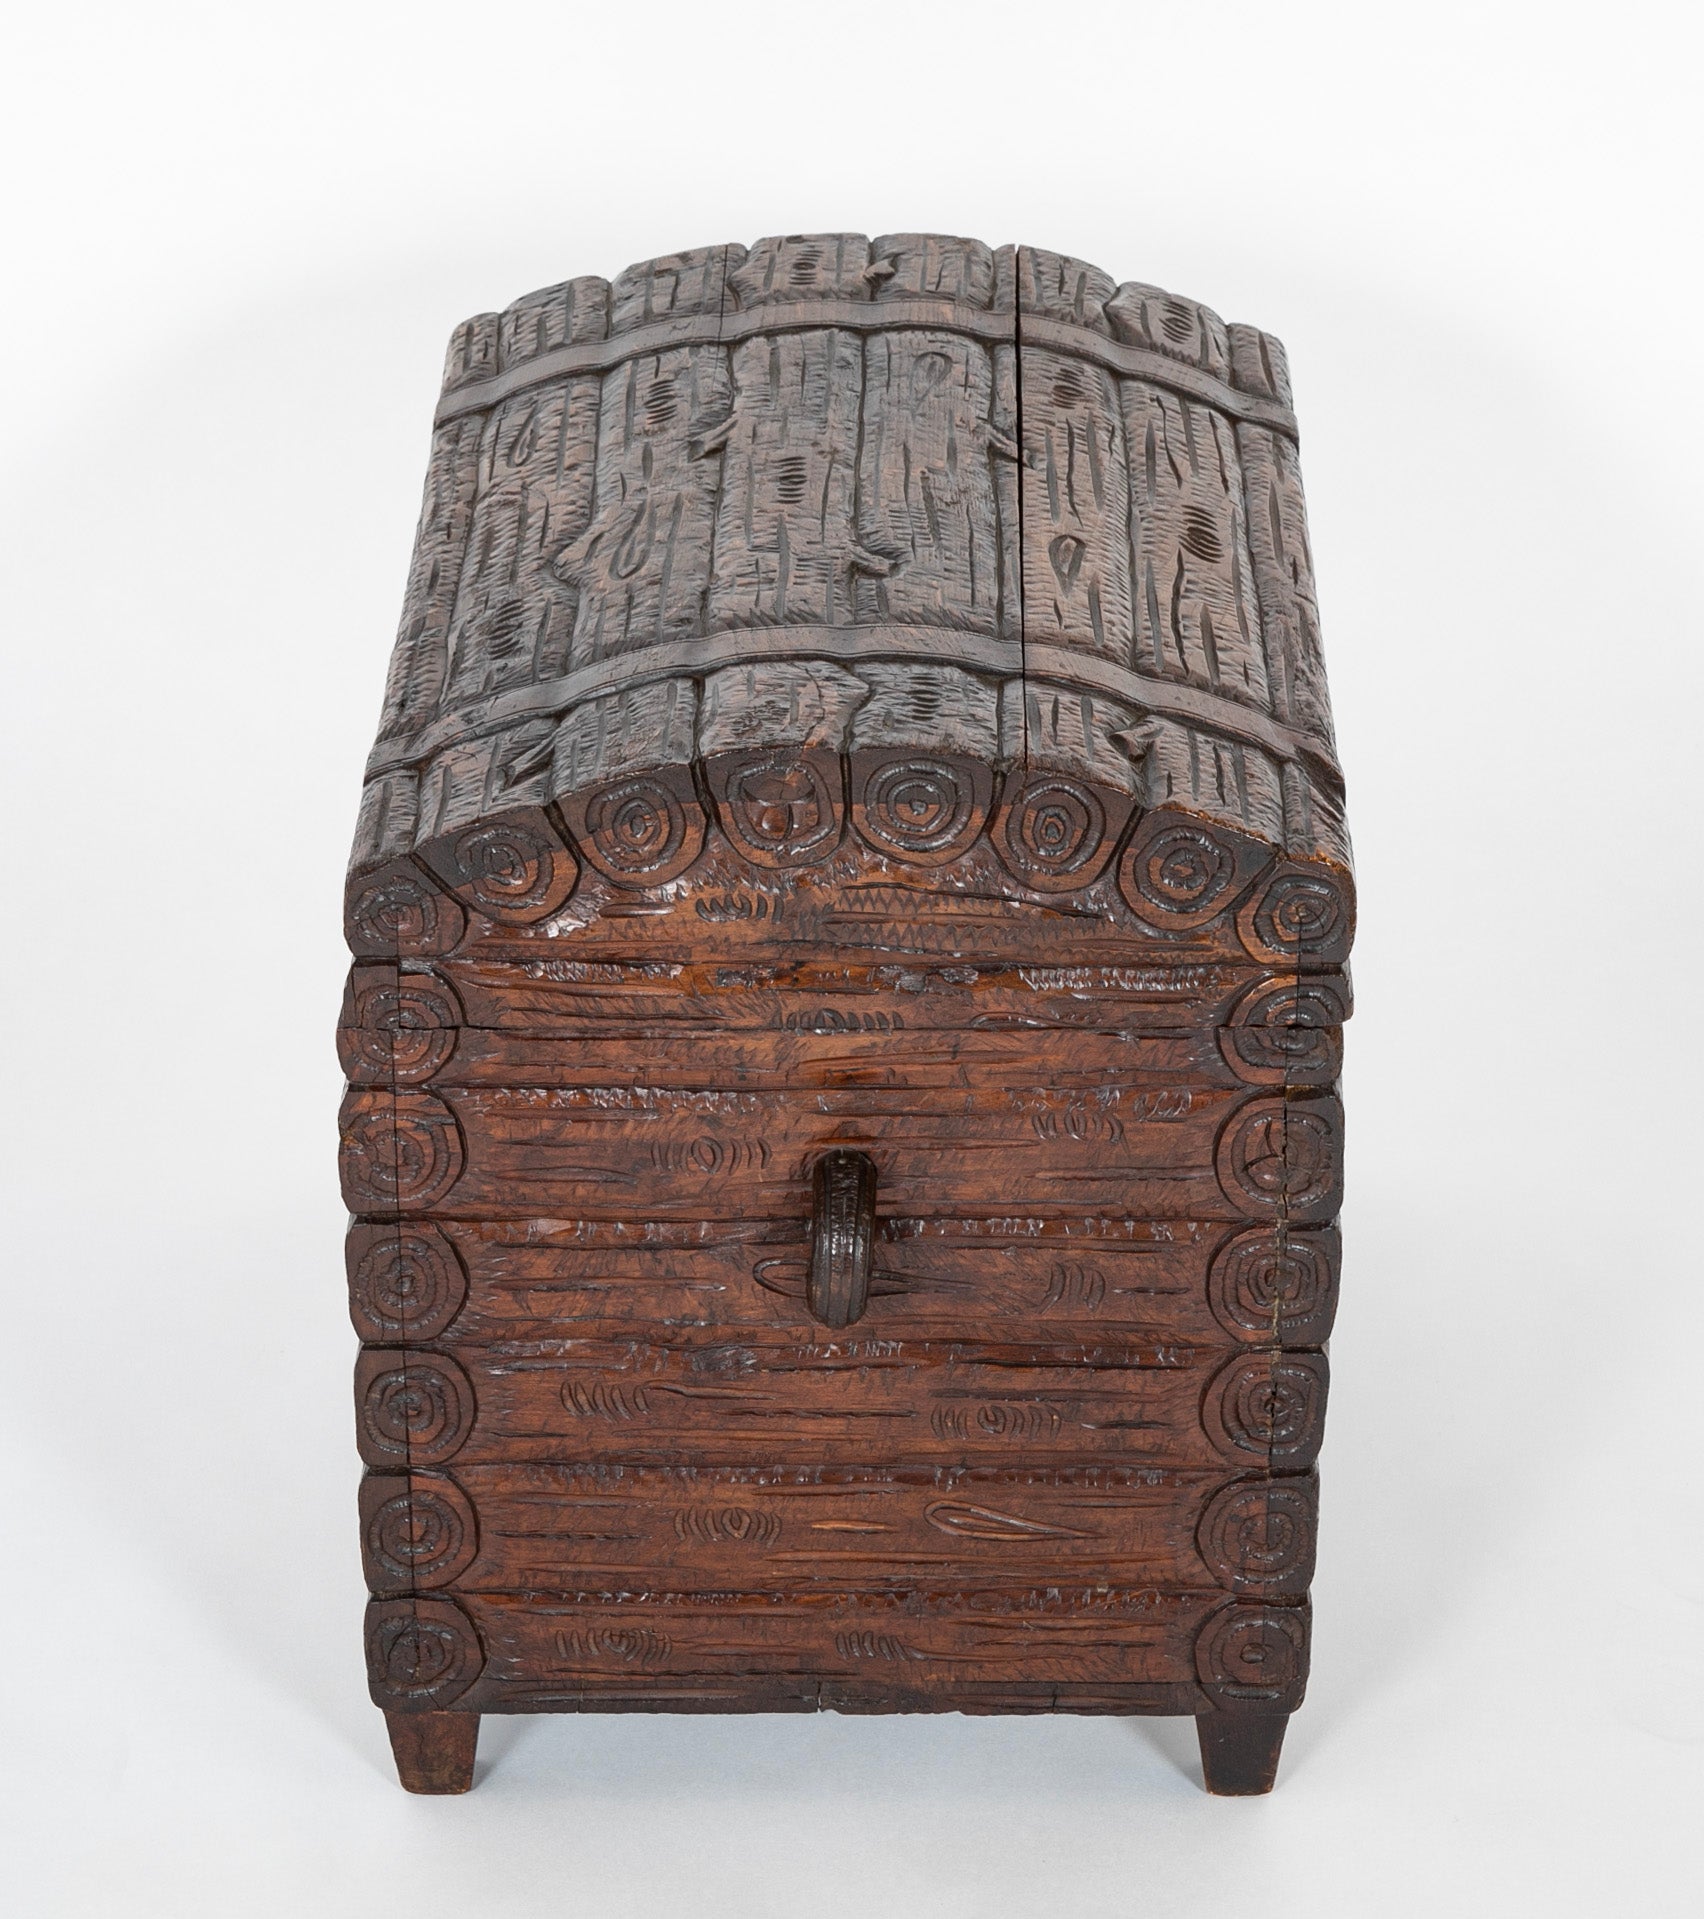 Black Forest Dome Top Trunk